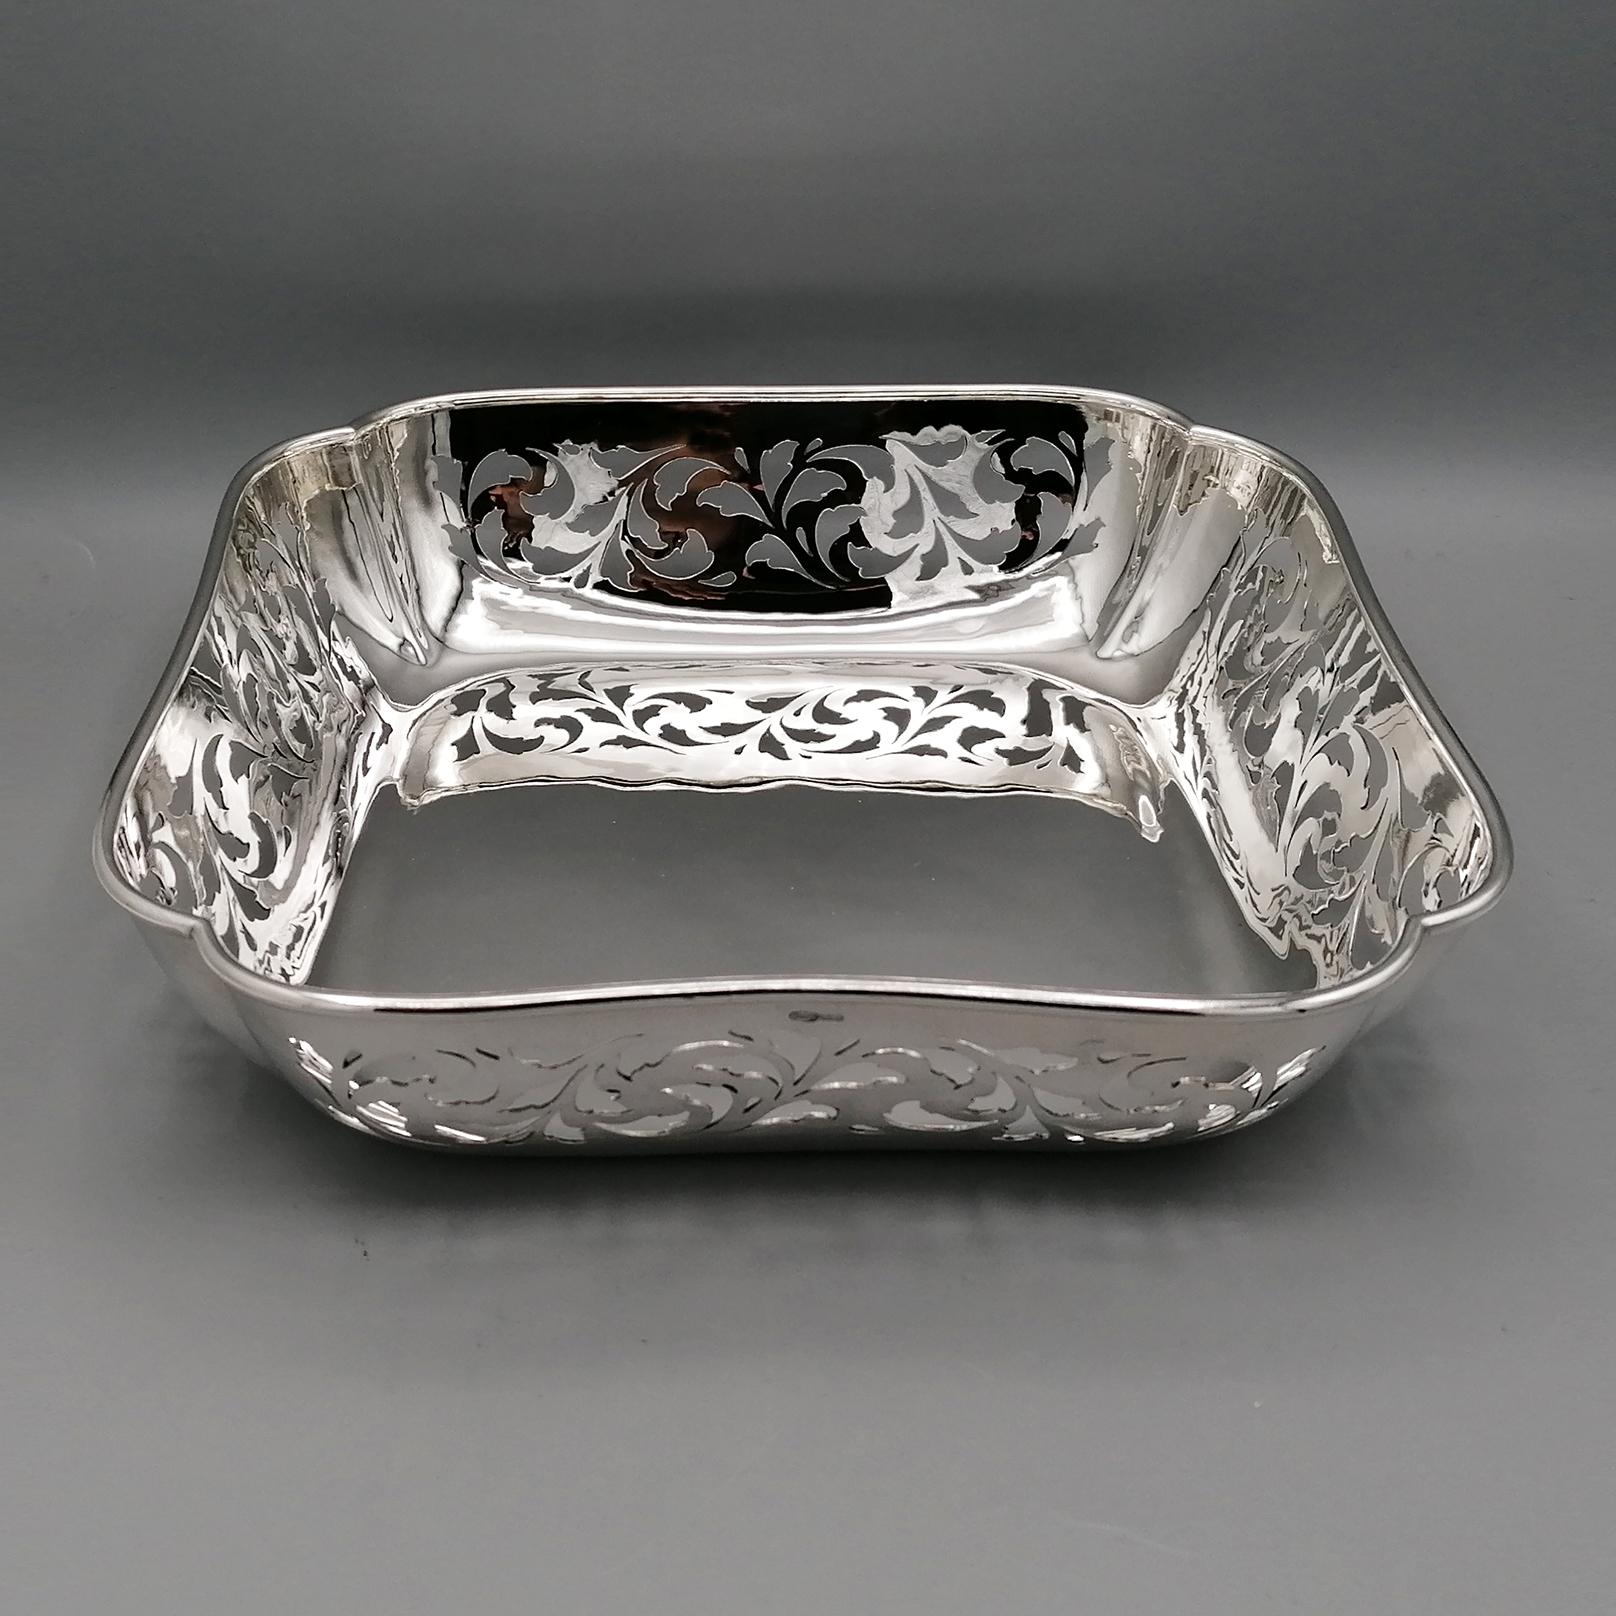 Handmade and Pierced Sterling Silver Centerpiece.
Impressive bowl, handcrafted in Milan - Italy in the artisan workshop of the silversmith Roberto Malagola.
The shape of the body is modelled, edged and subsequently hand-pierced with florwers